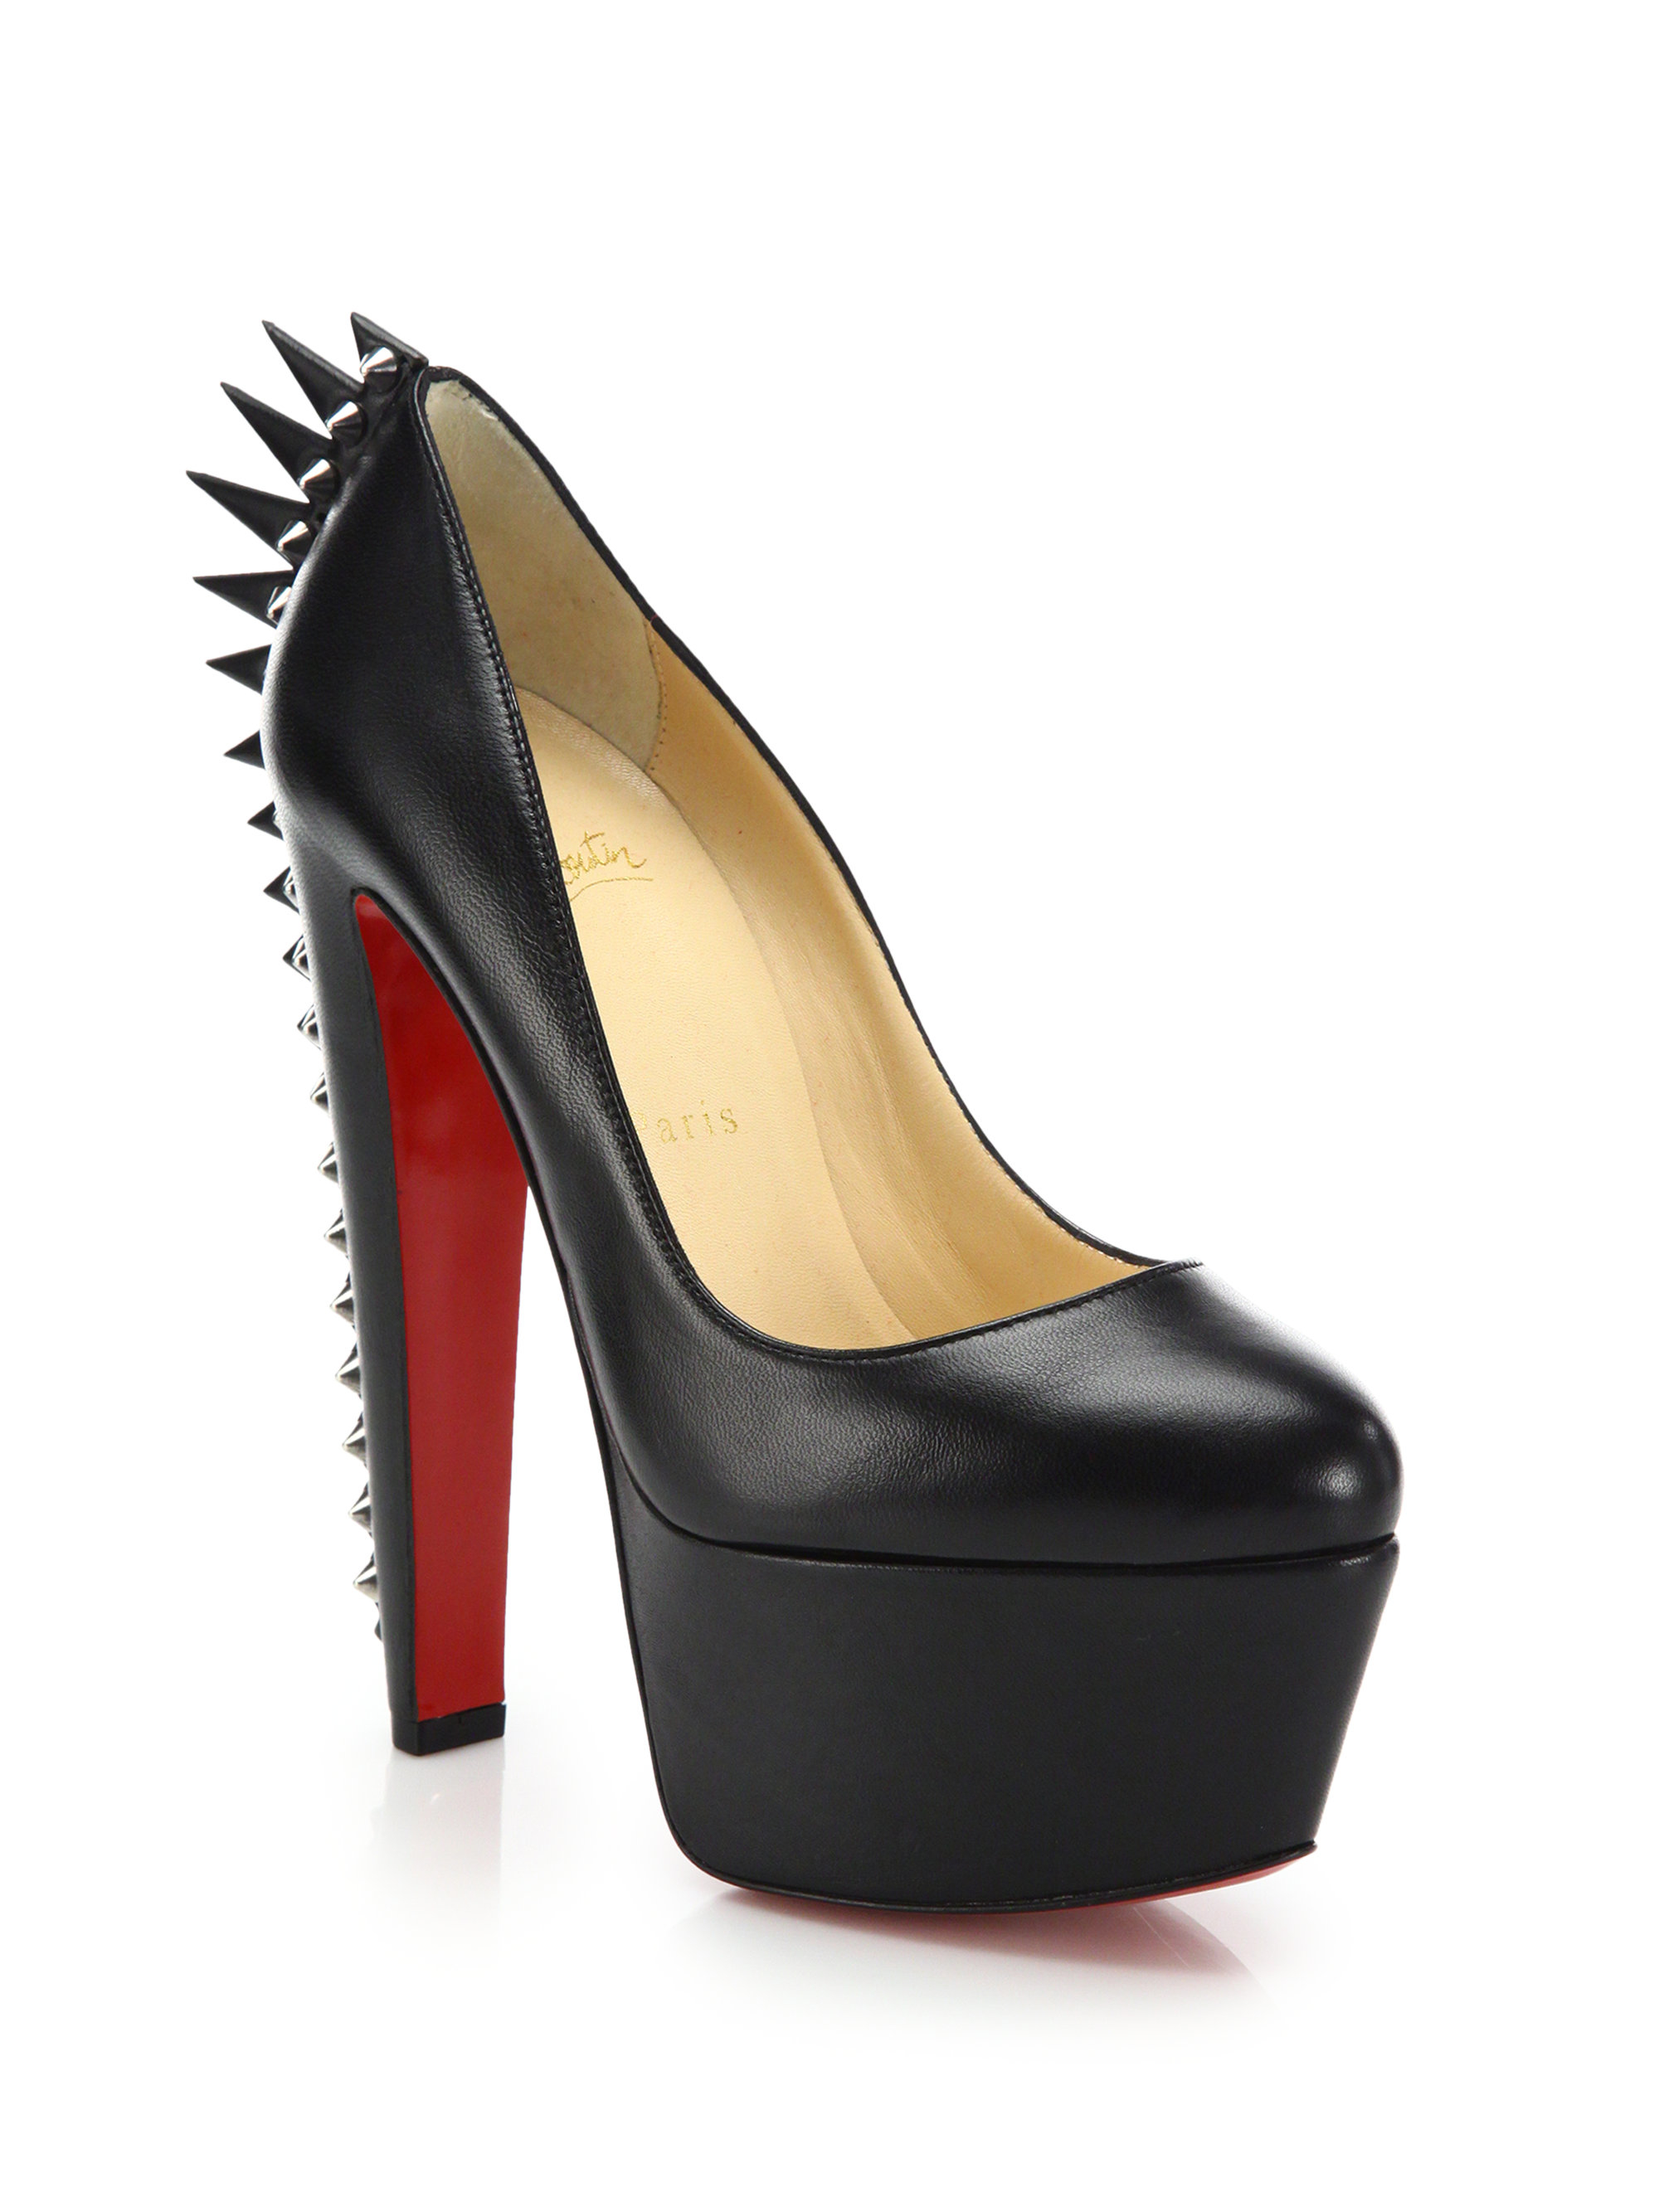 Christian louboutin Electropump Spiked Leather Platform Pumps in ...